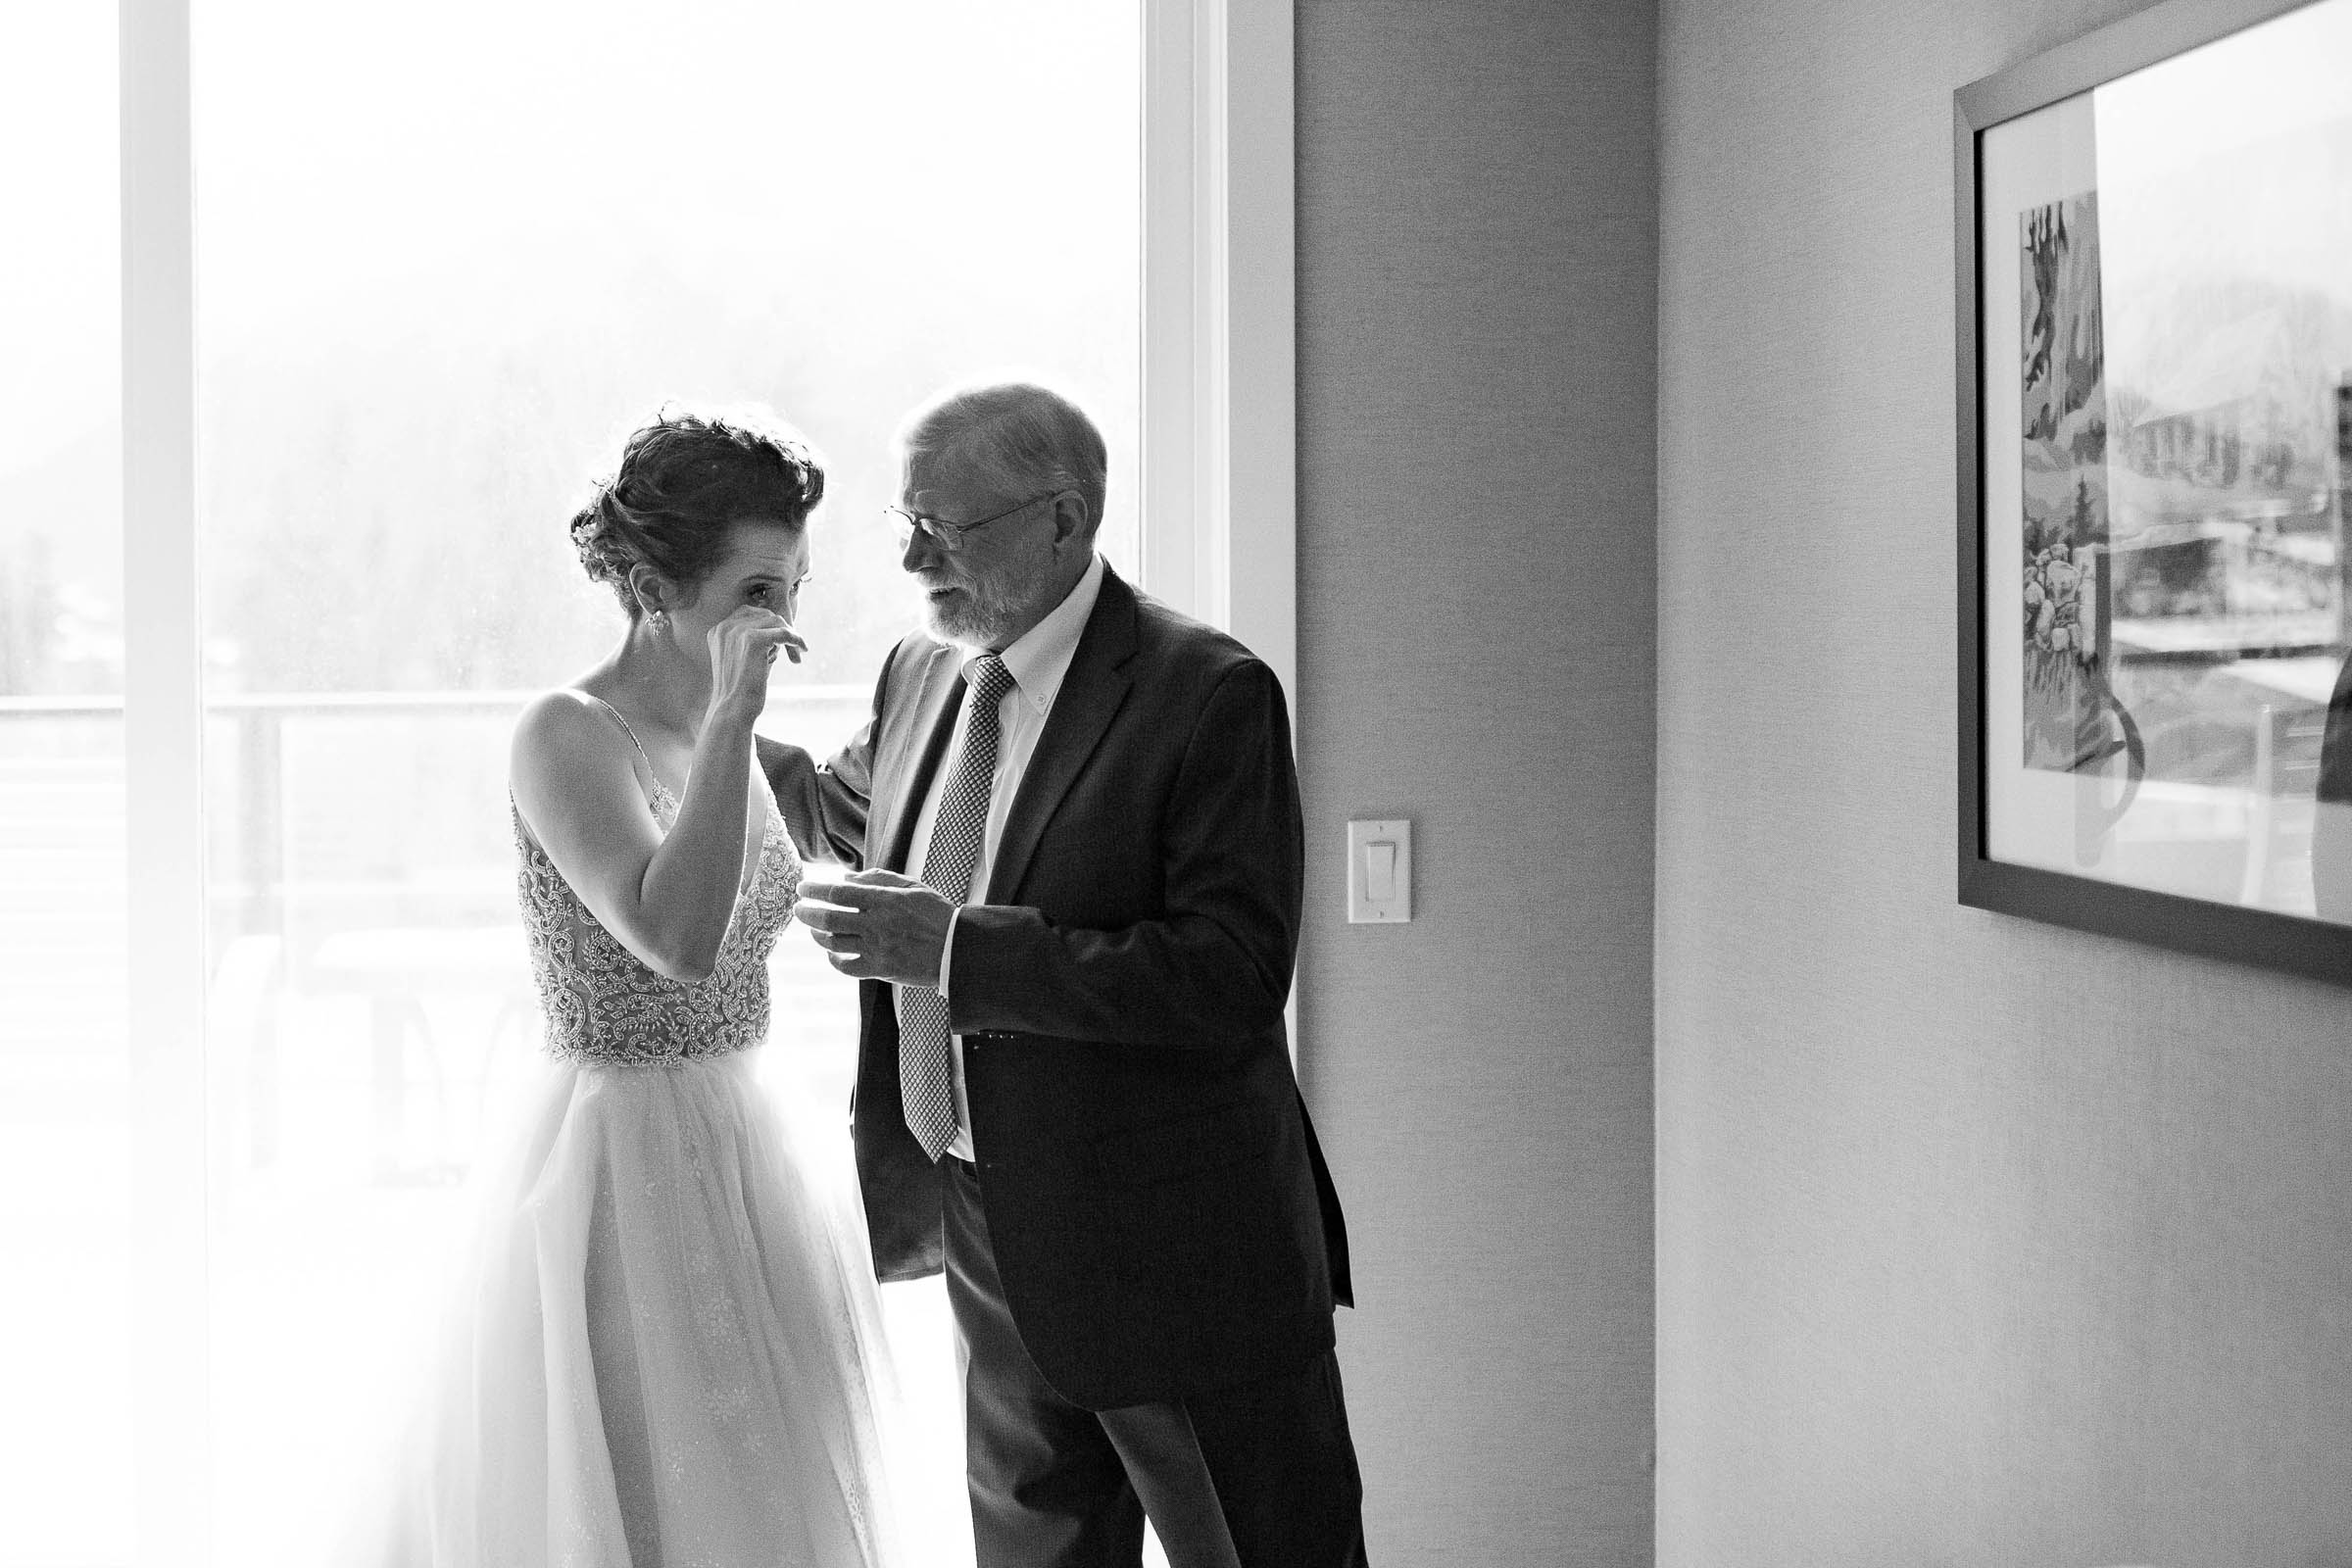 Bride wiping a tear from her eye as her father speaks to her before her wedding